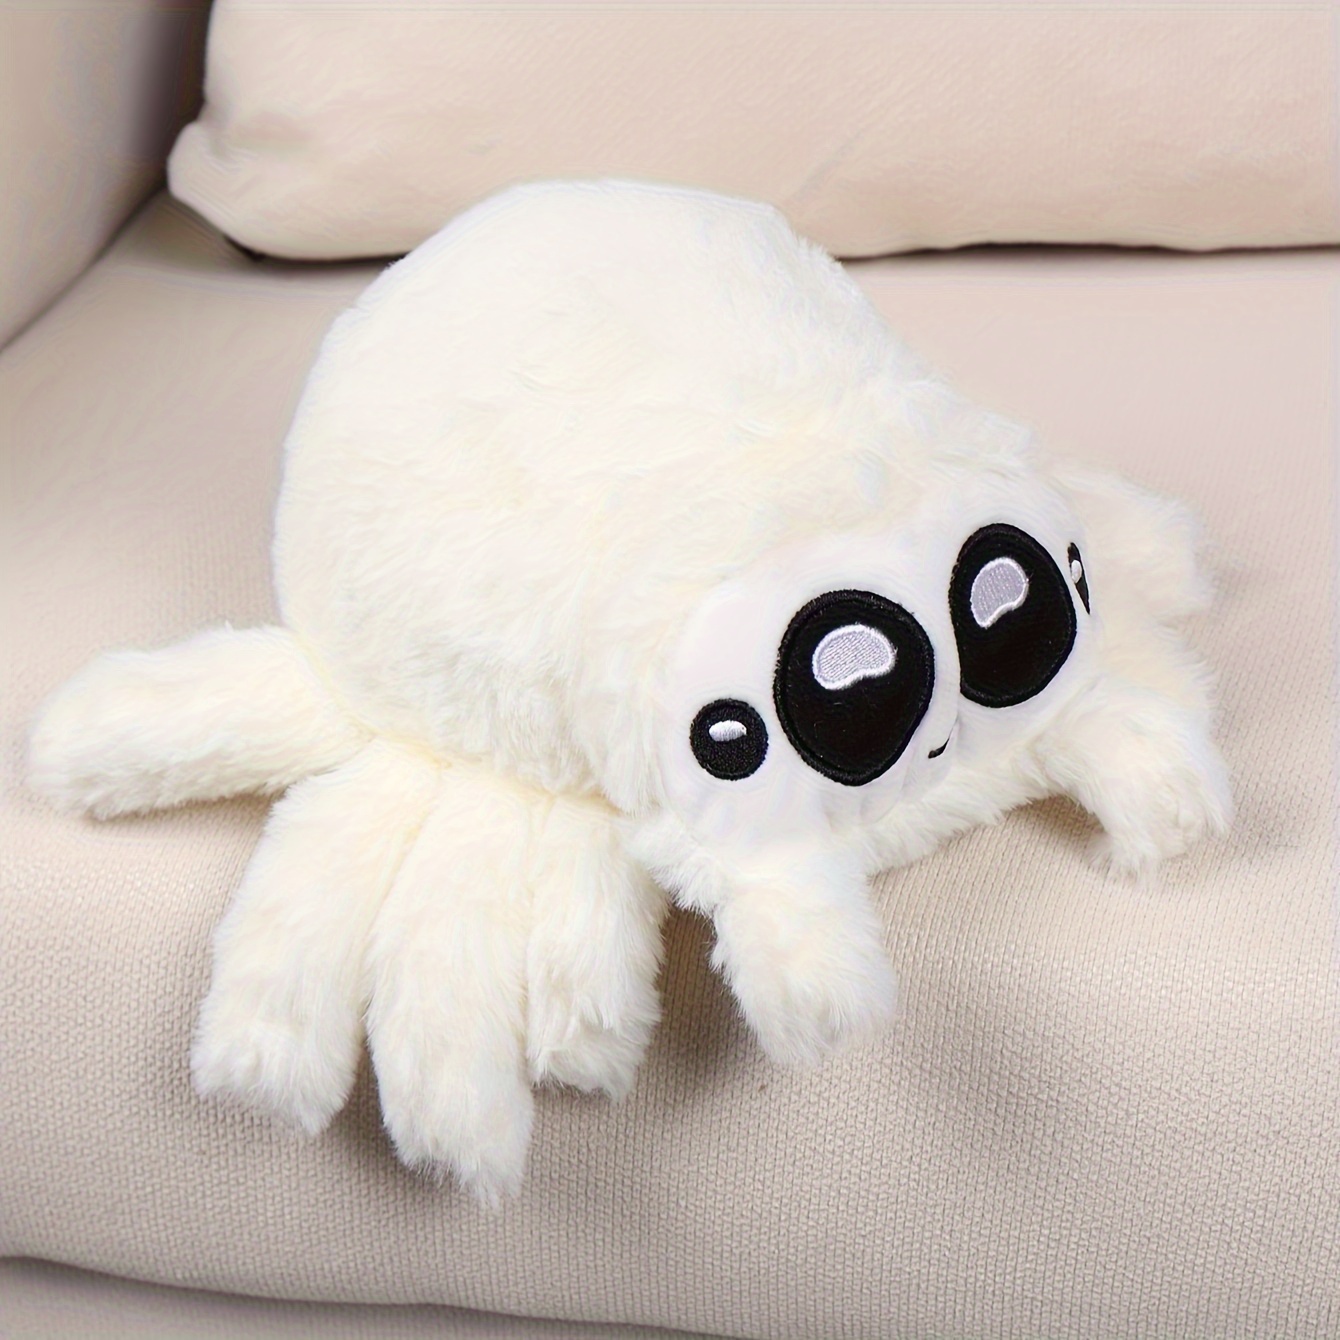 

1pc Black And White Plush Spider Toy Home Decoration Holiday Ornament For Gifting To Friends, Suitable For Valentine's Day And Halloween.